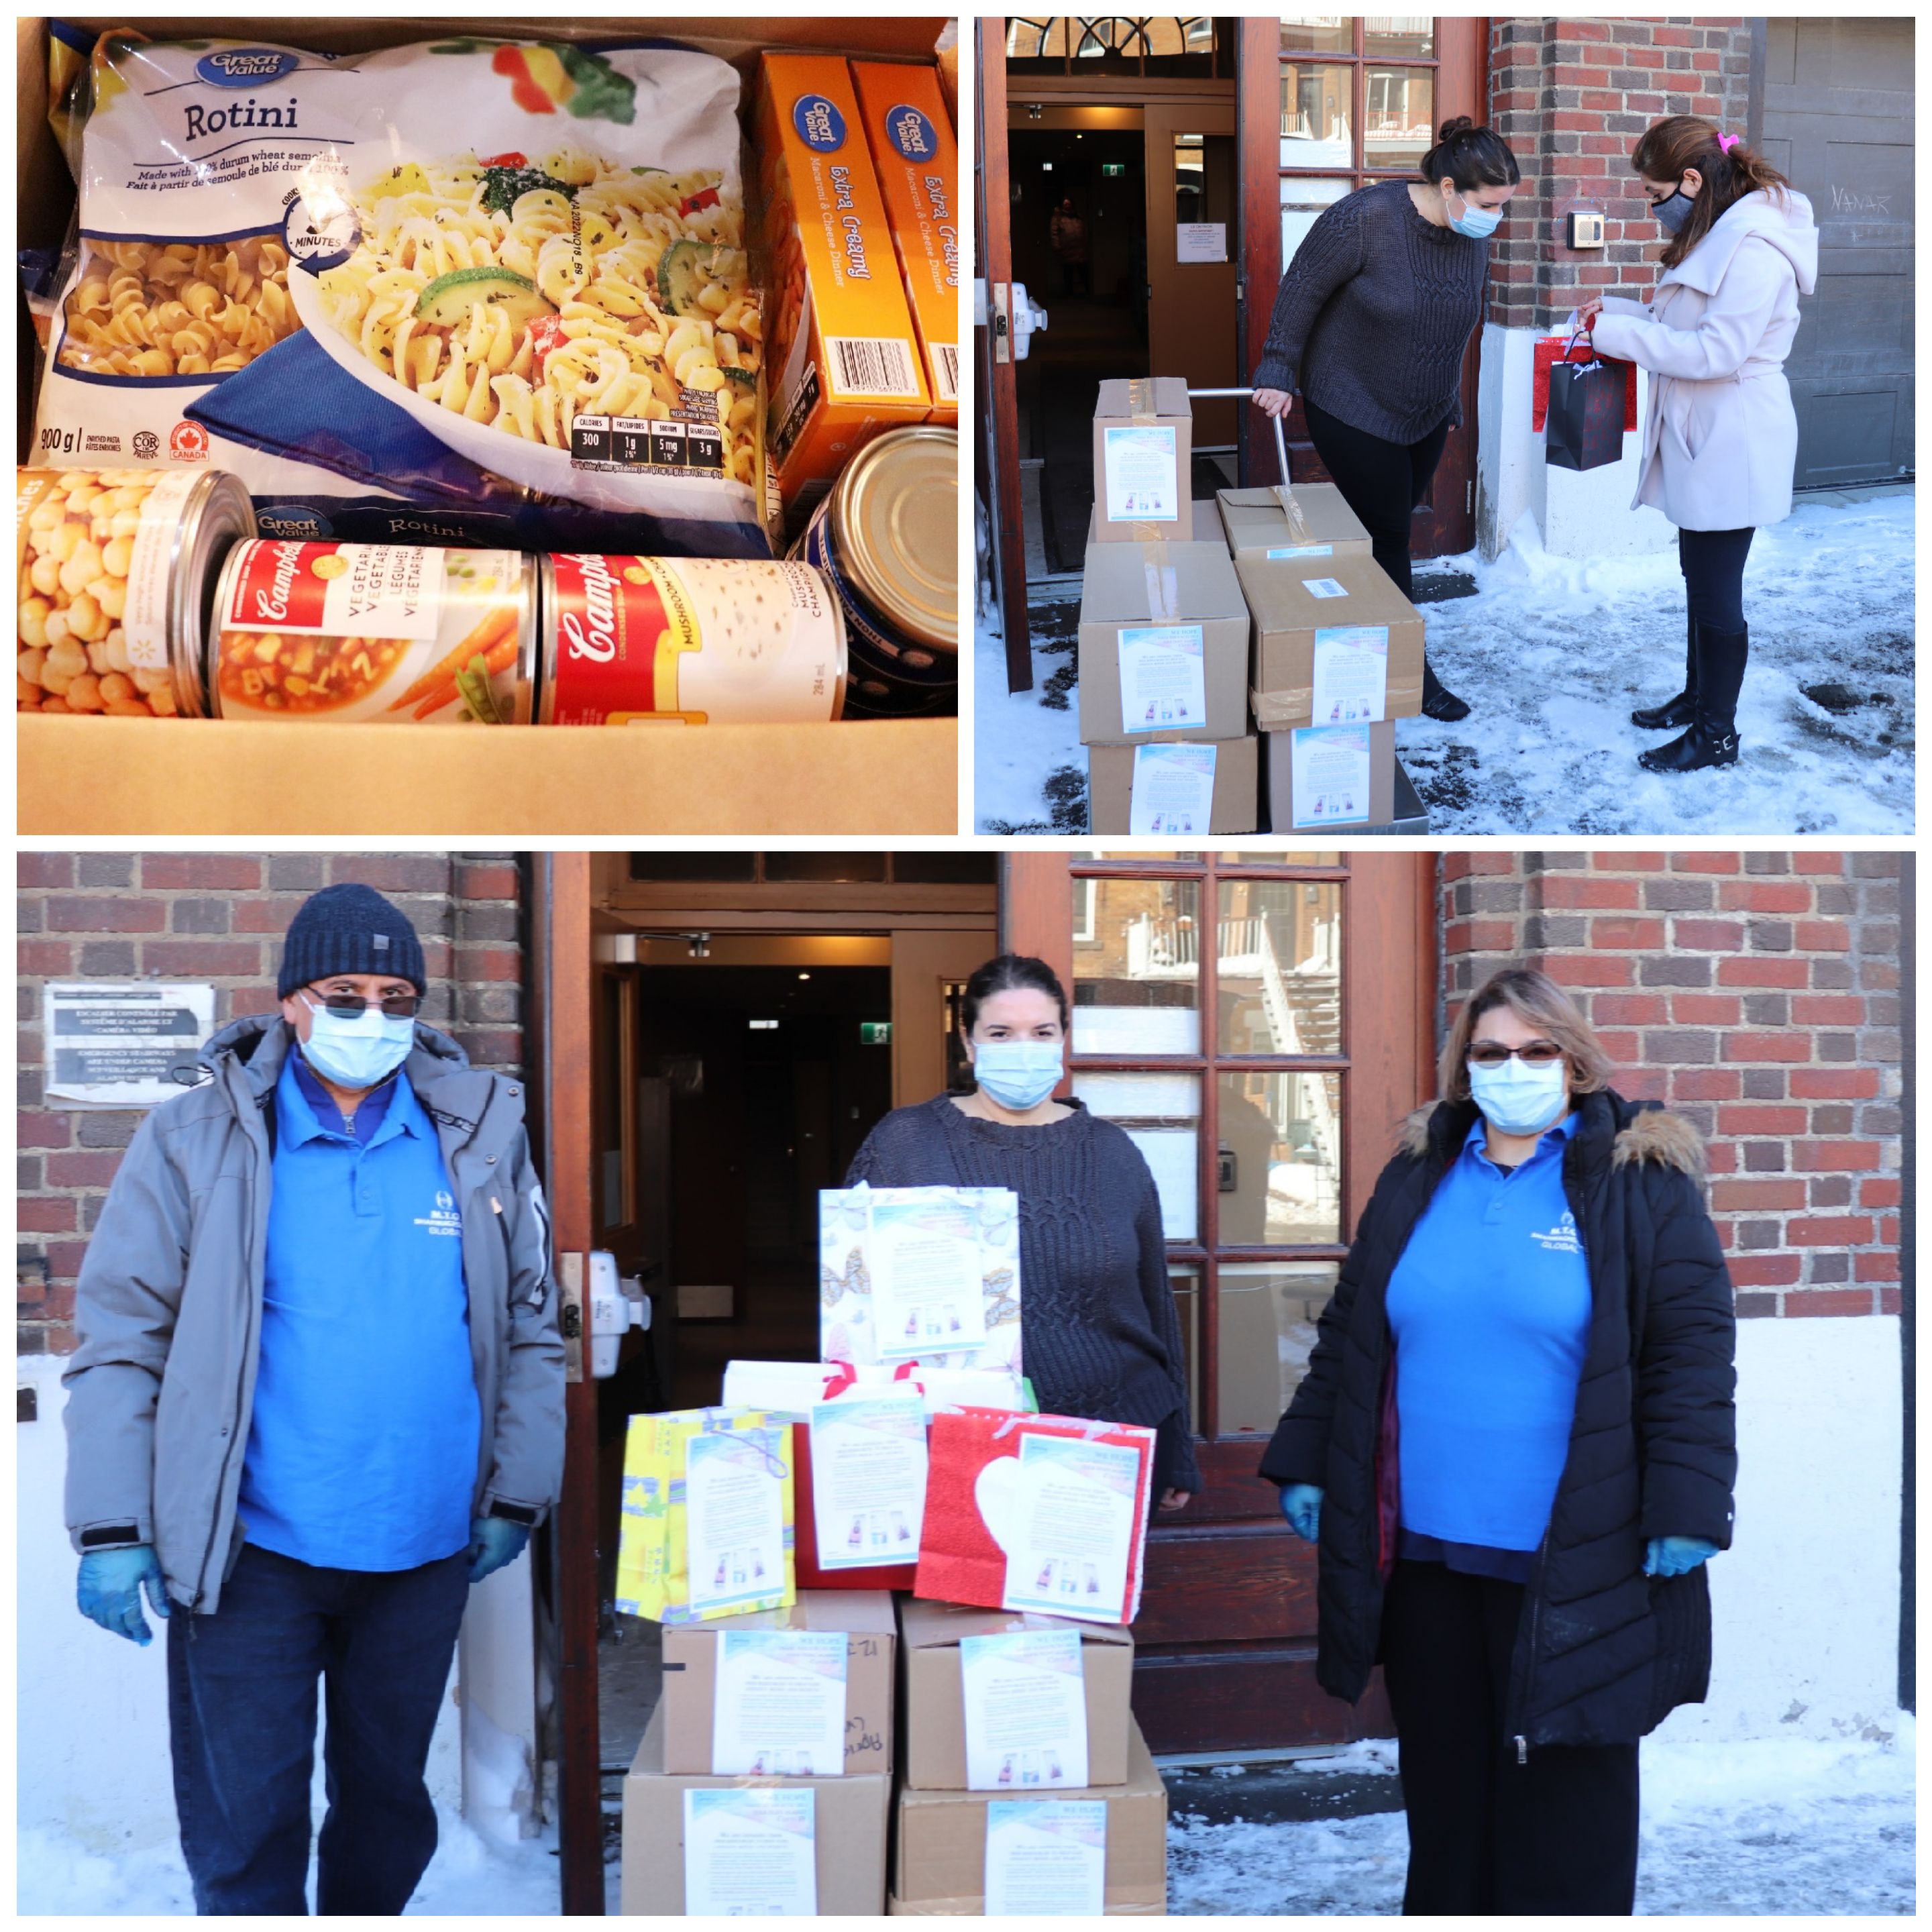 M.T.O. Montreal Hosts Food Drive for Shelter in Celebration of Professor Sadegh Angha's Birthday